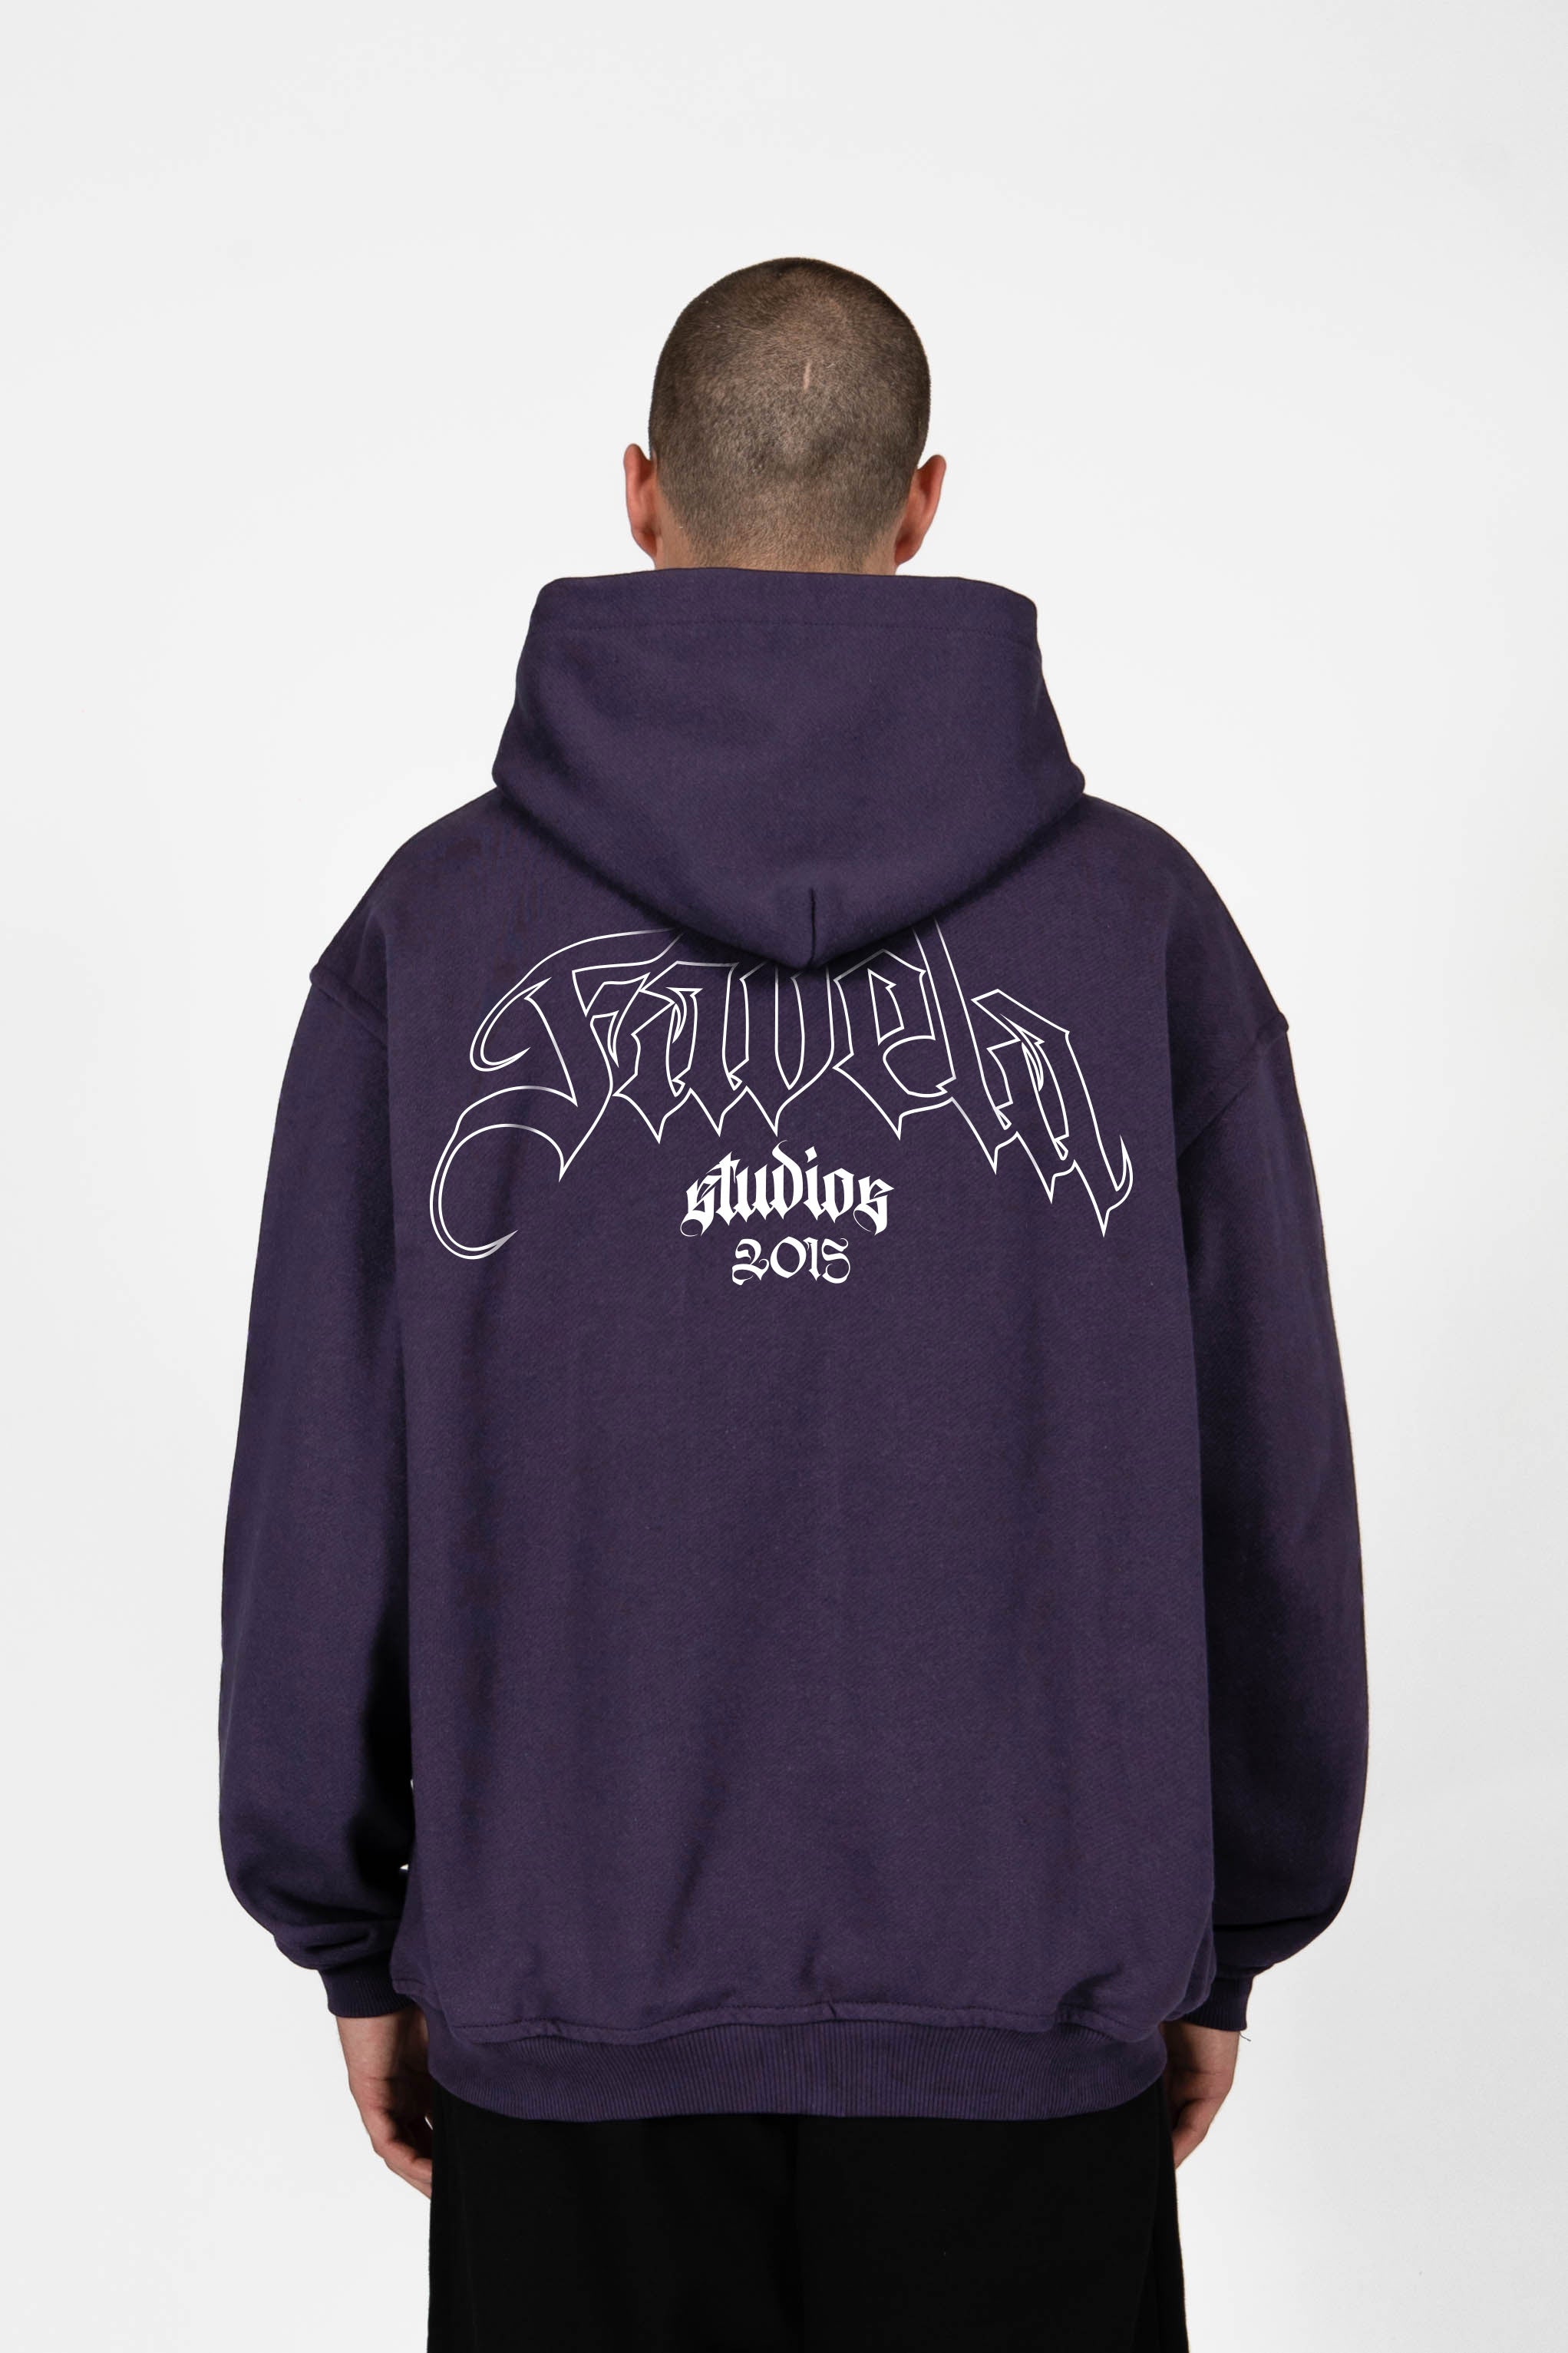 OUTLINE PLUM SNAP BUTTON HOODIE